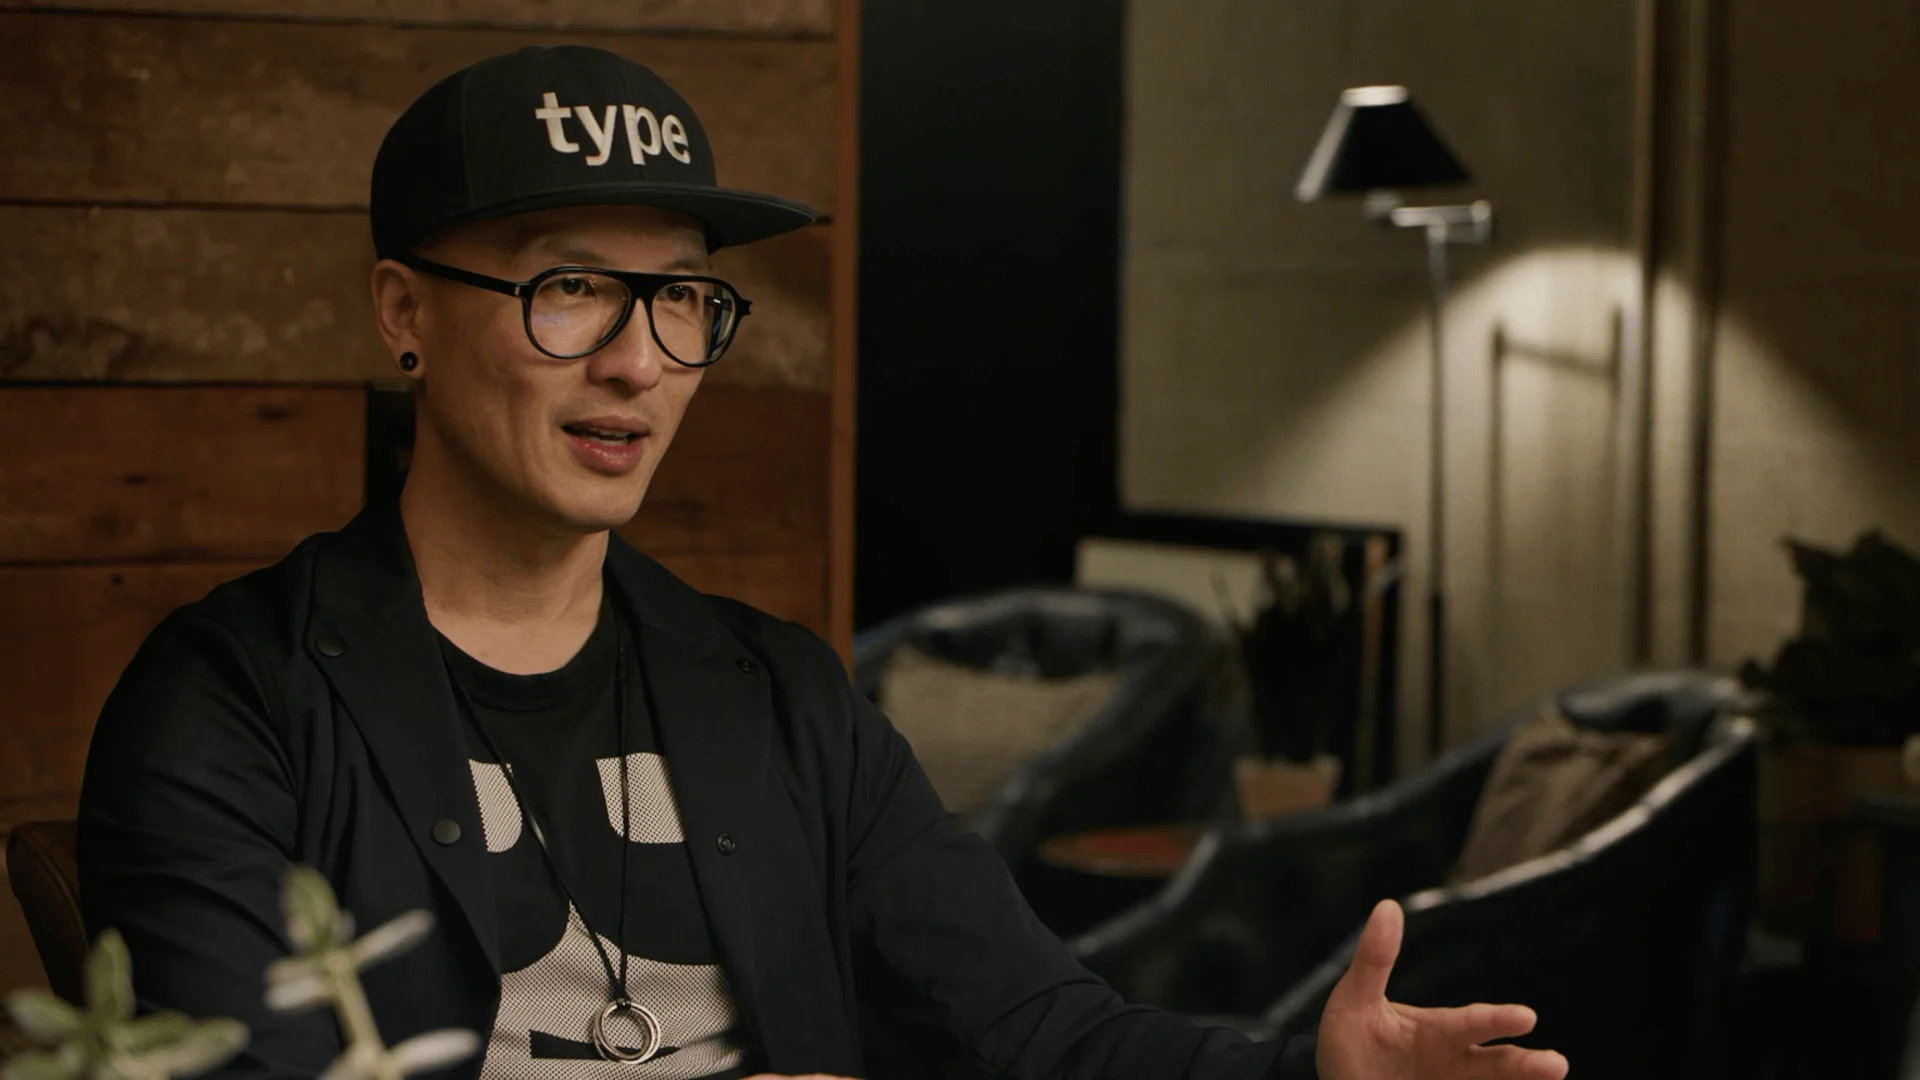 Chris Do, an Emmy award-winning designer and the visionary behind the online educational platform "Futur,"